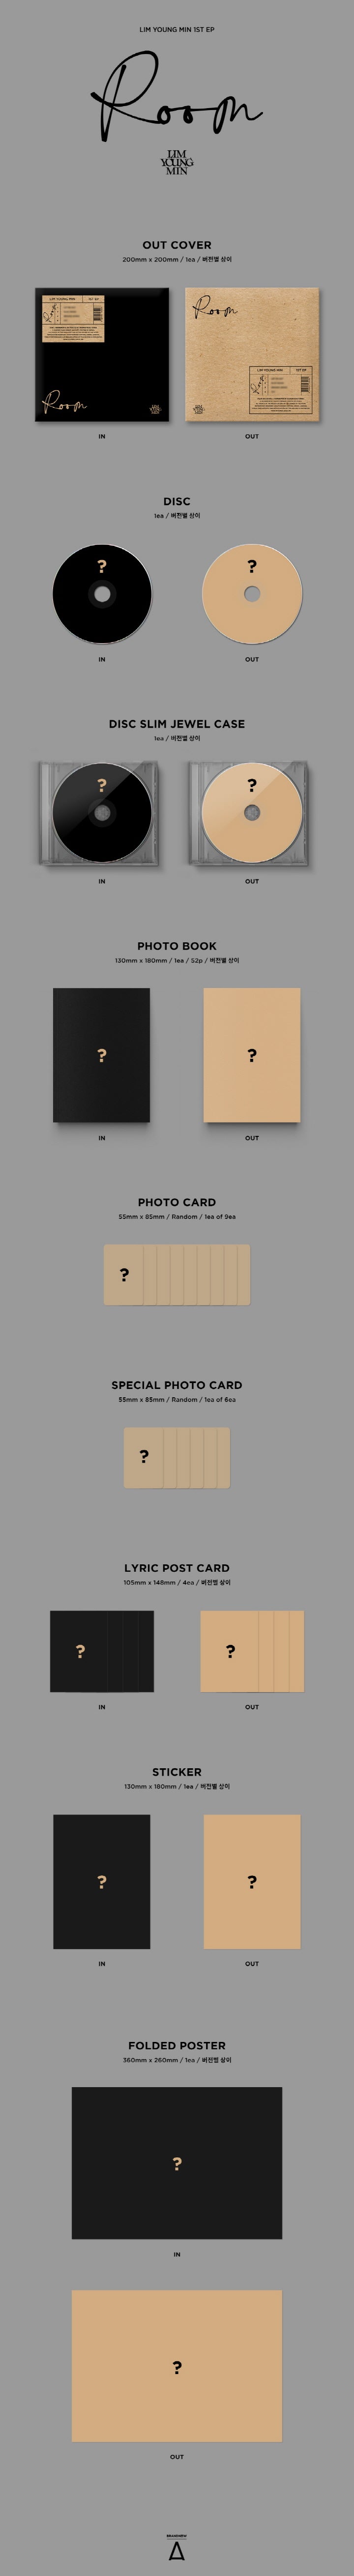 1 CD
1 Photo Book (52 pages)
1 Photo Card (random out of 9 types)
1 Special Photo Card (random out of 6 types)
4 Lyric Pos...